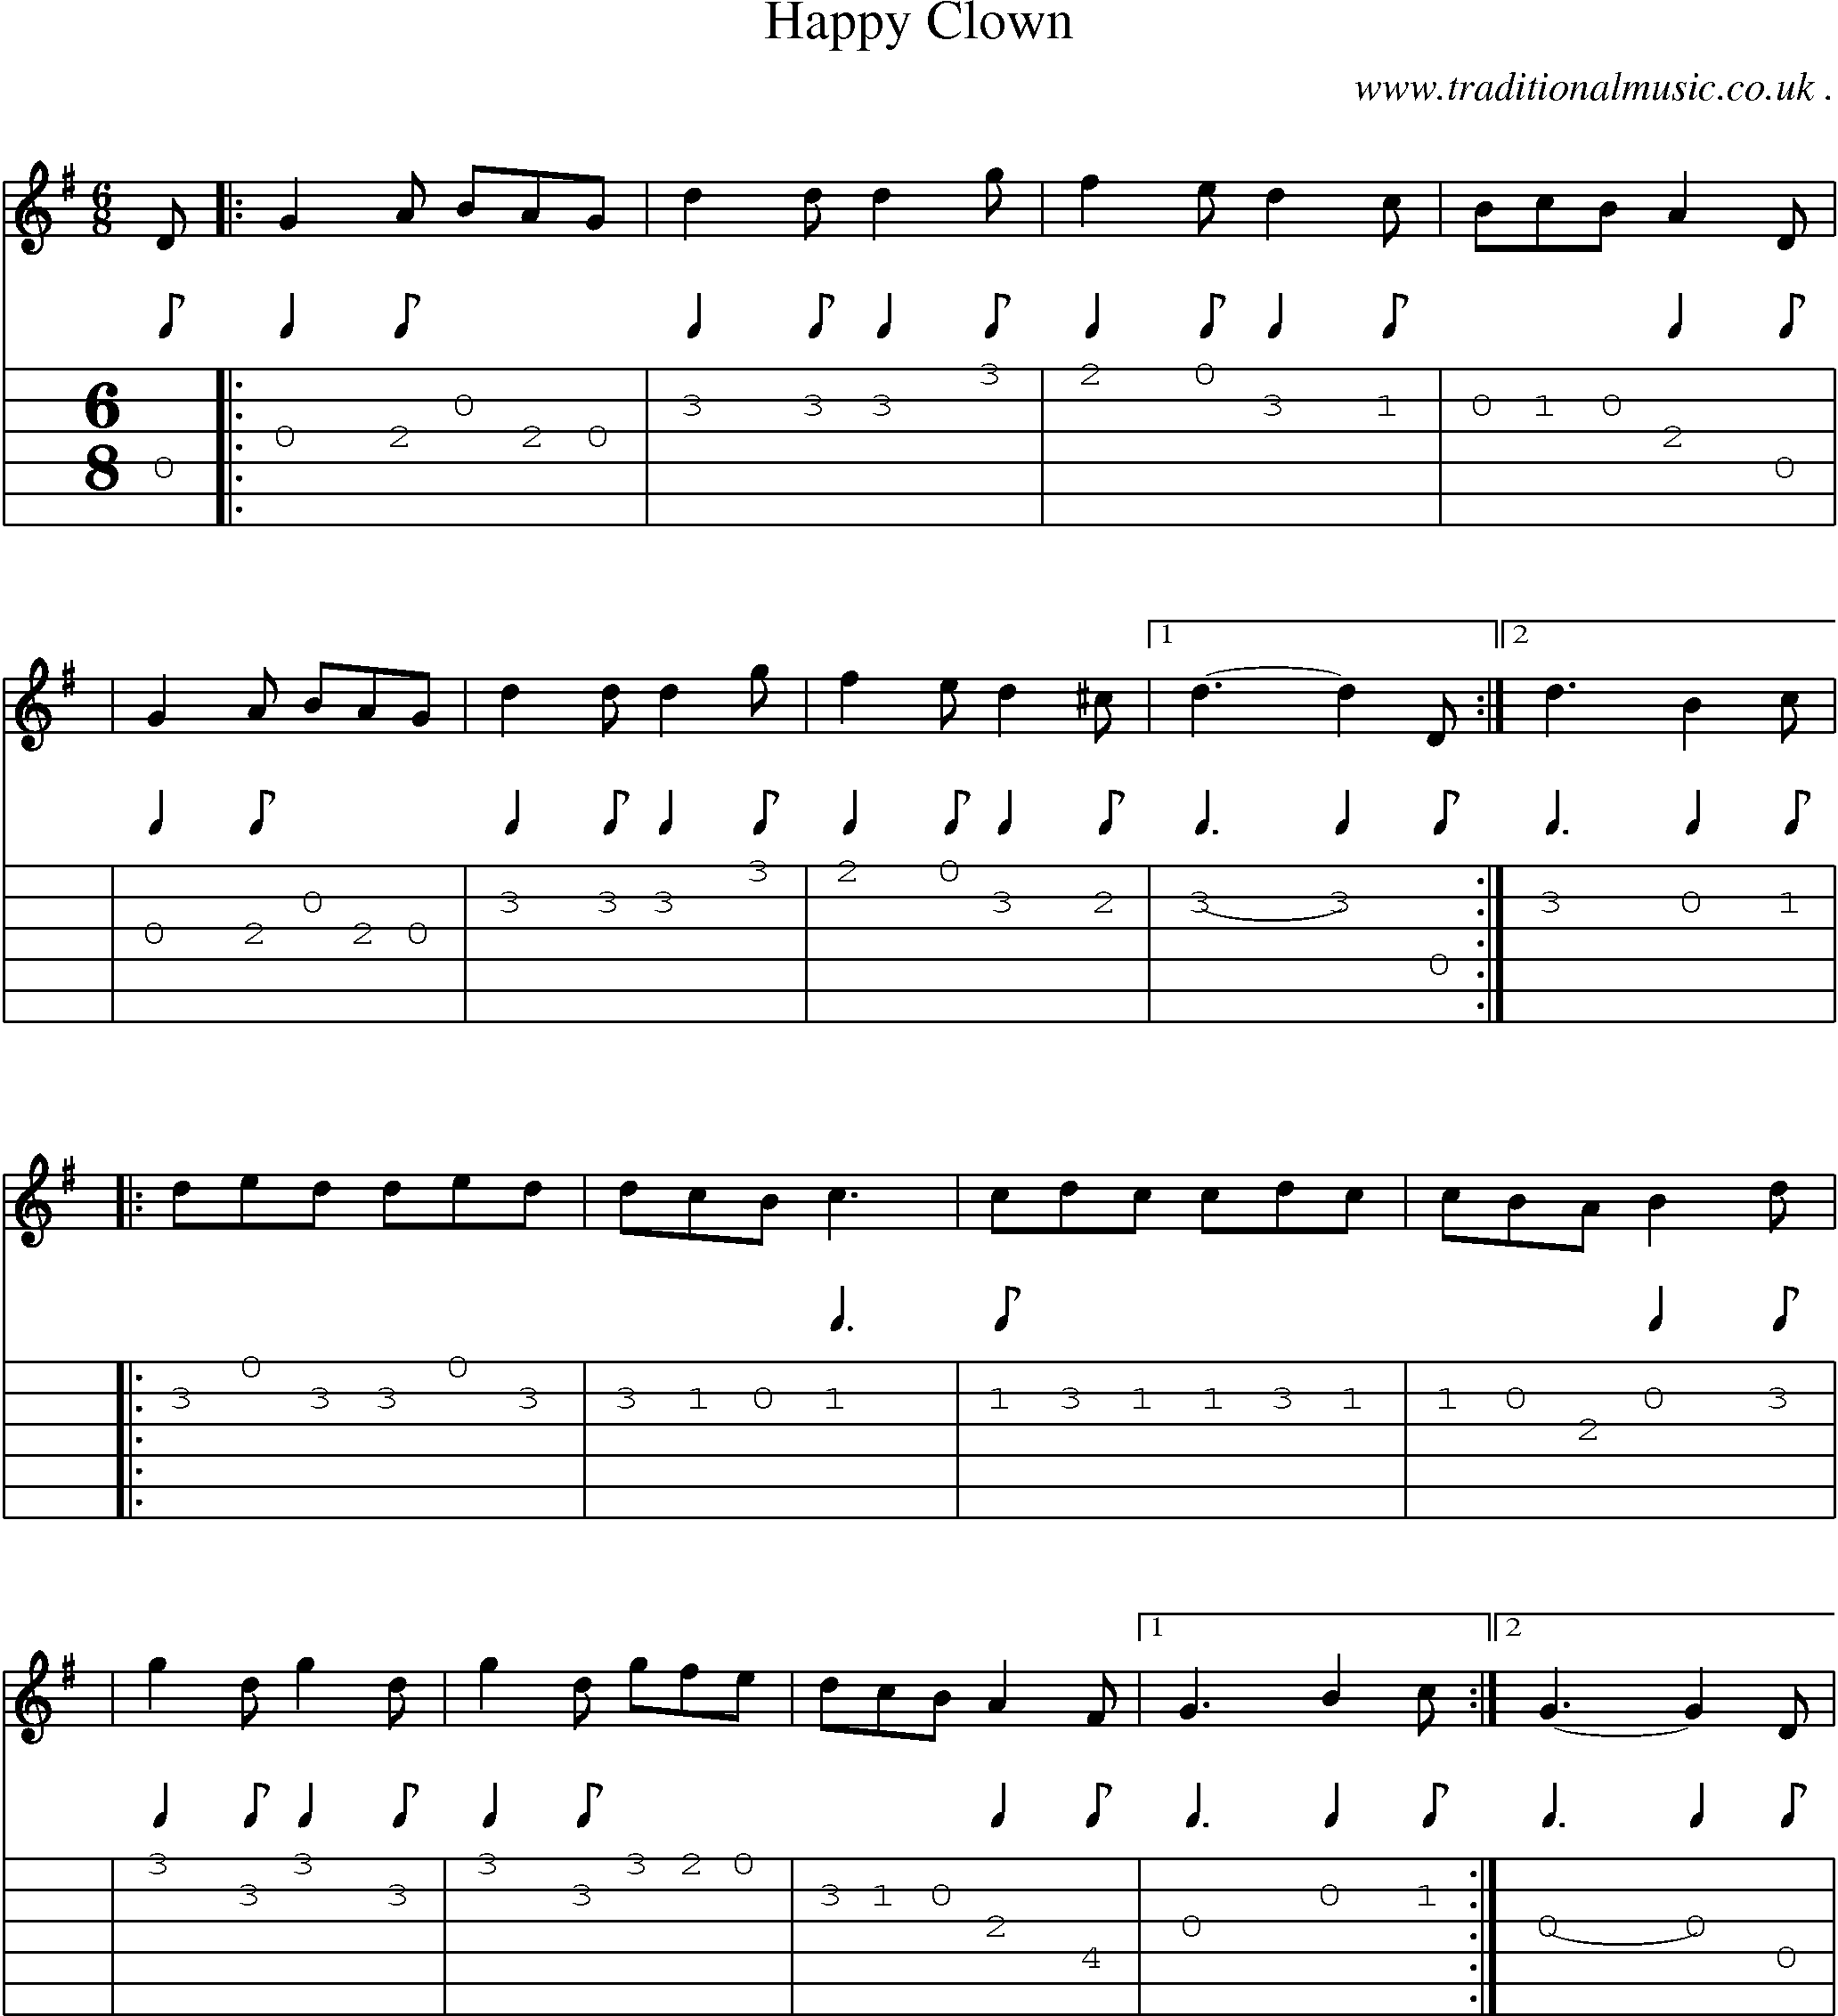 Sheet-Music and Guitar Tabs for Happy Clown